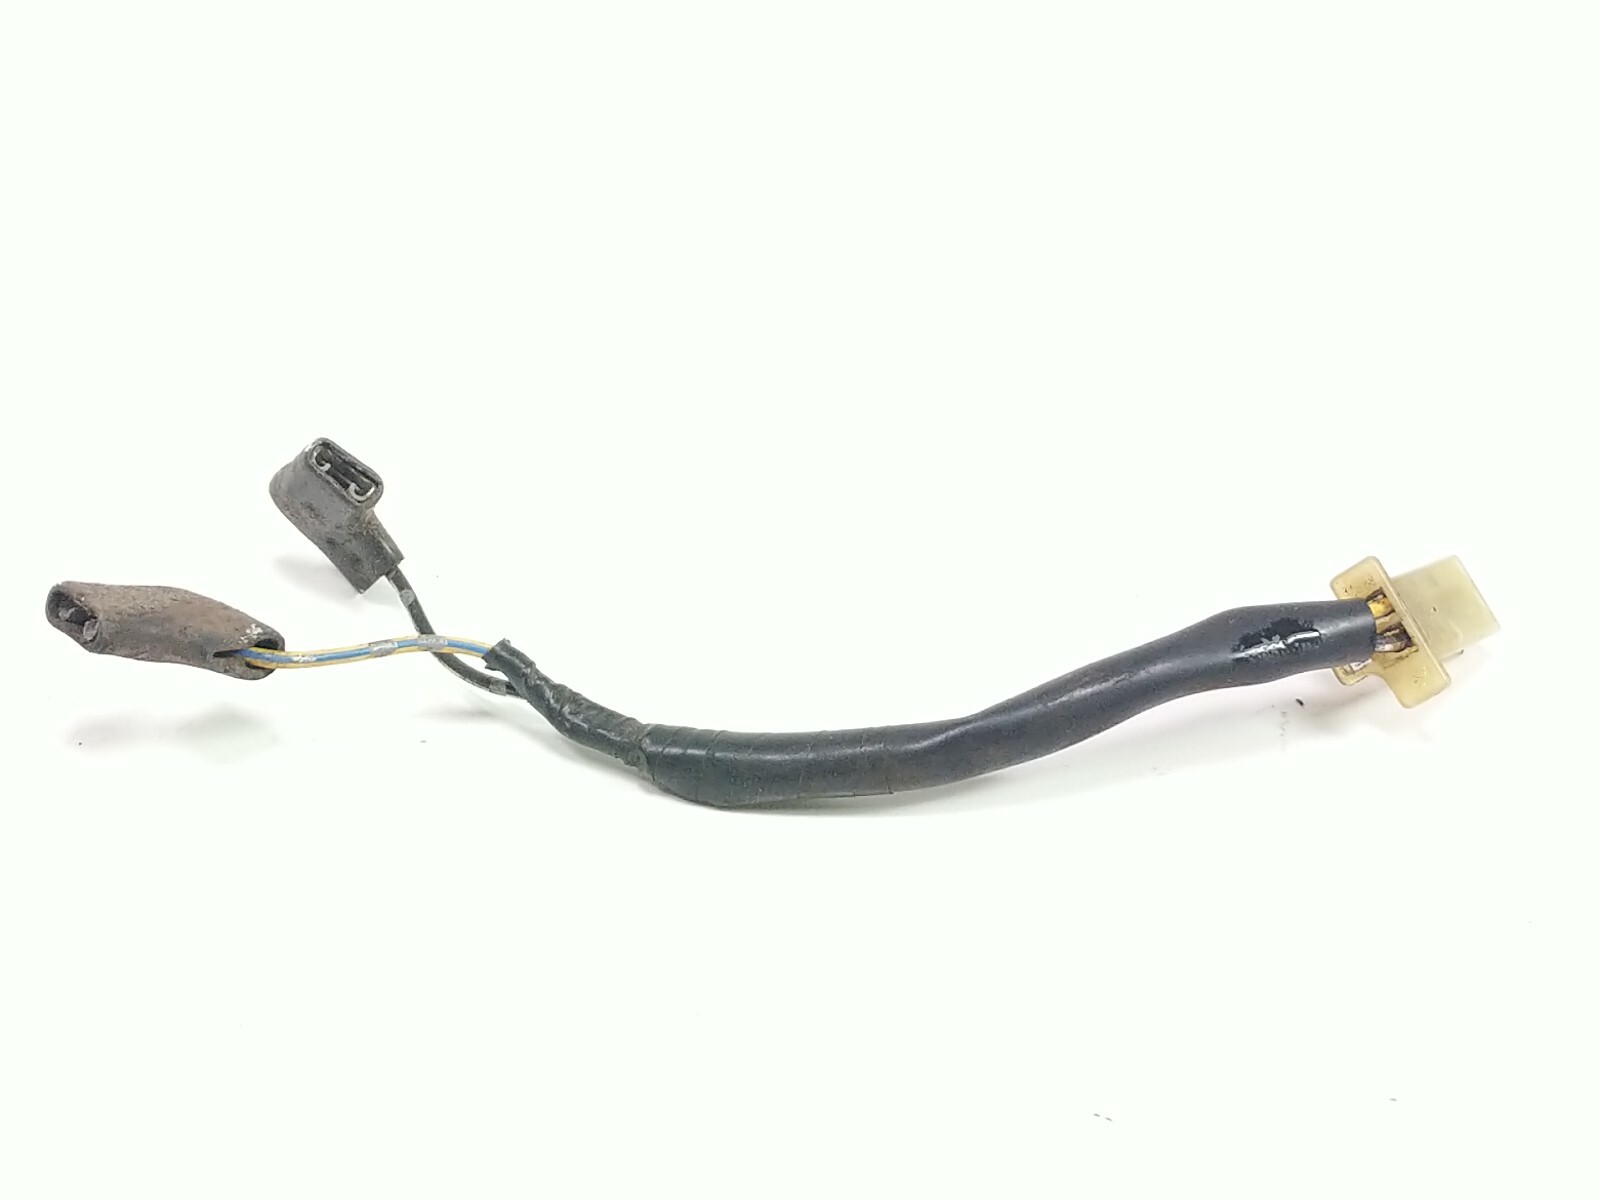 06 Honda VTX1300C VTX 1300 Ignition Coil To Rear Wire Wiring Harness